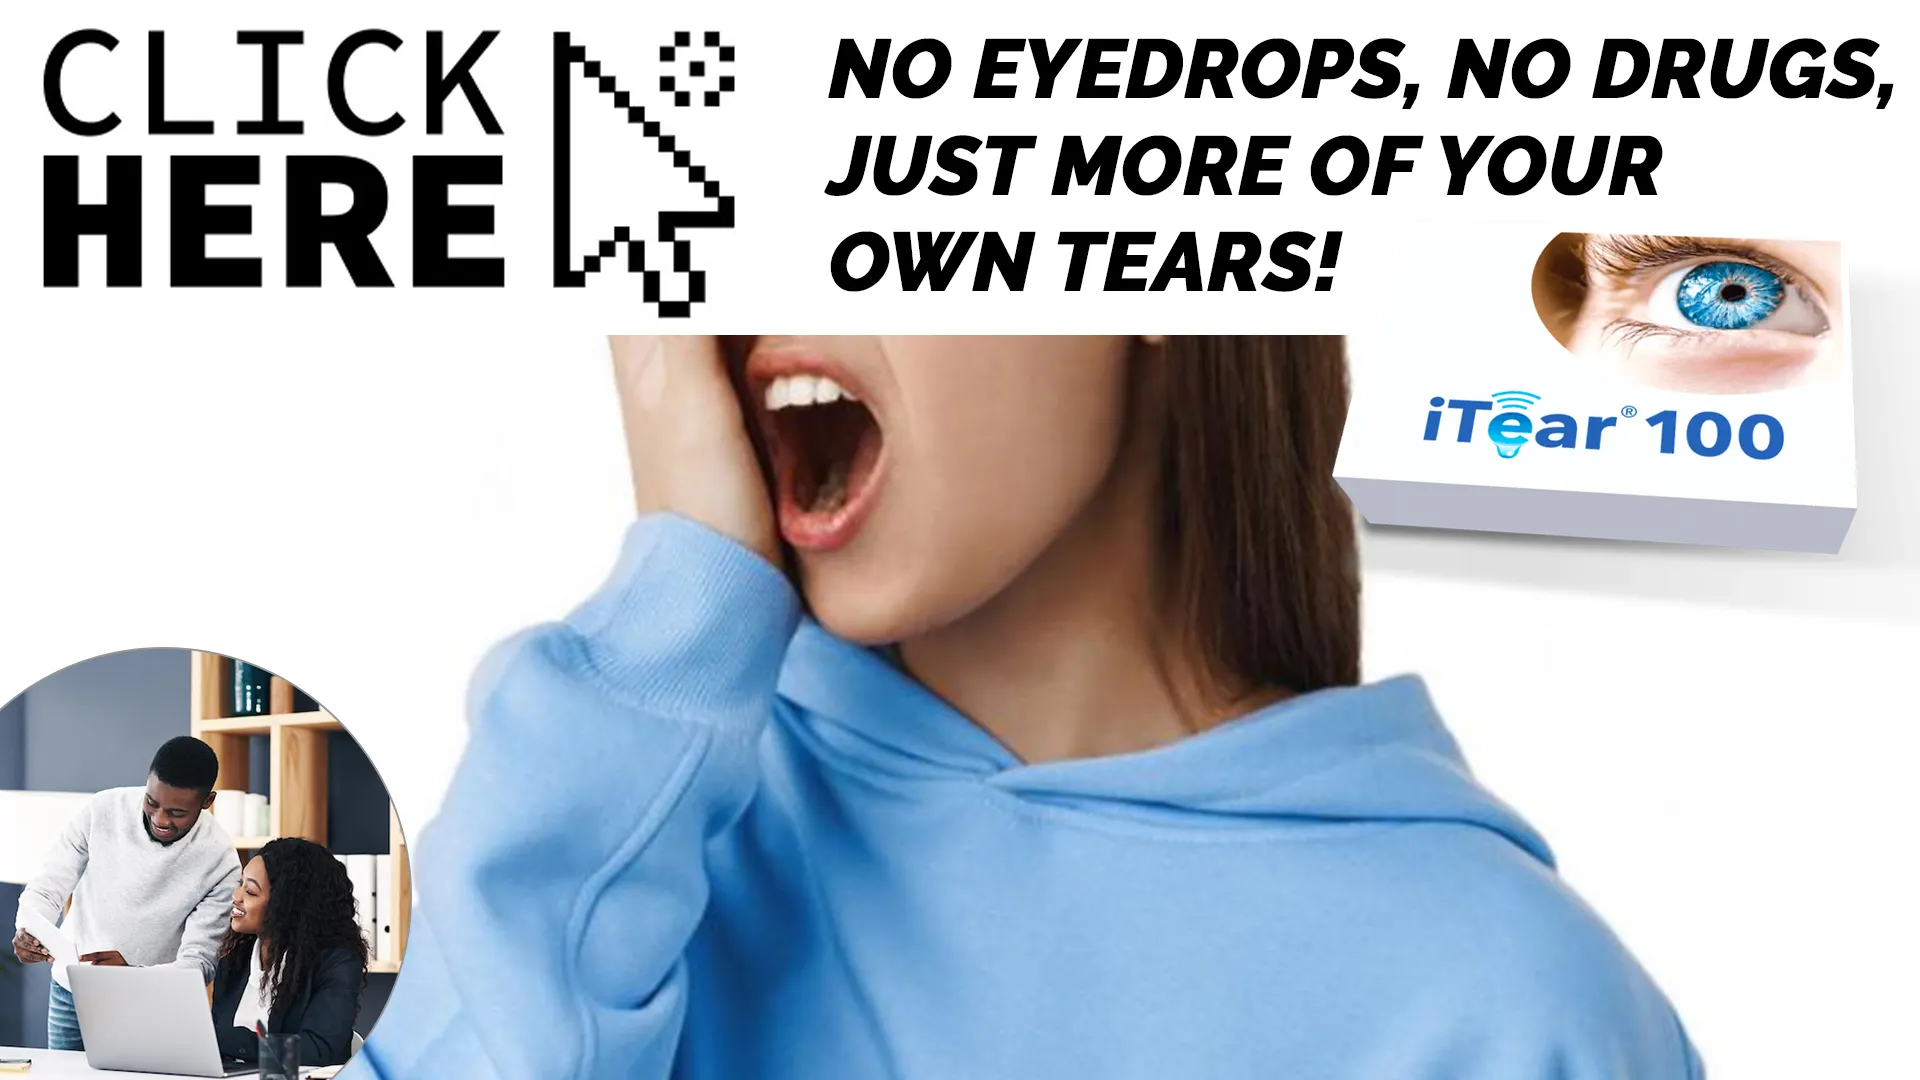 Turn the Tide Against Dry Eyes: Natural Relief is Here